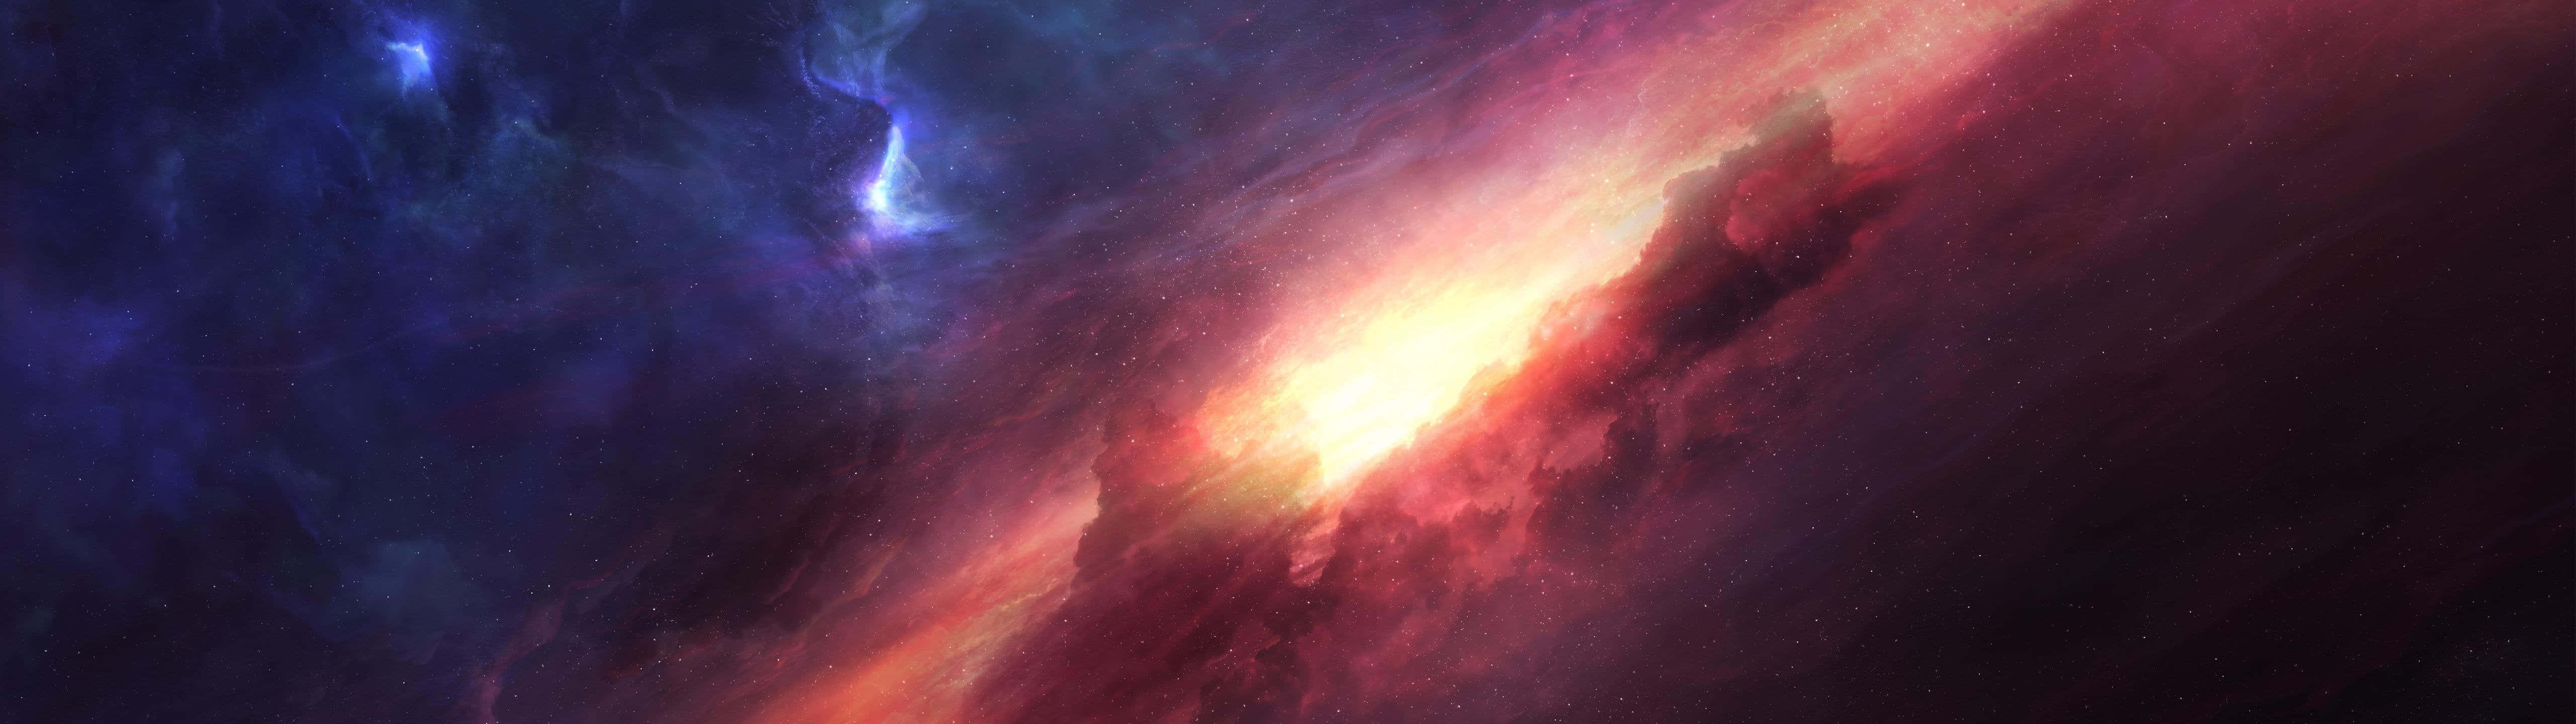 A Painting Of A Spaceship In Space Wallpaper